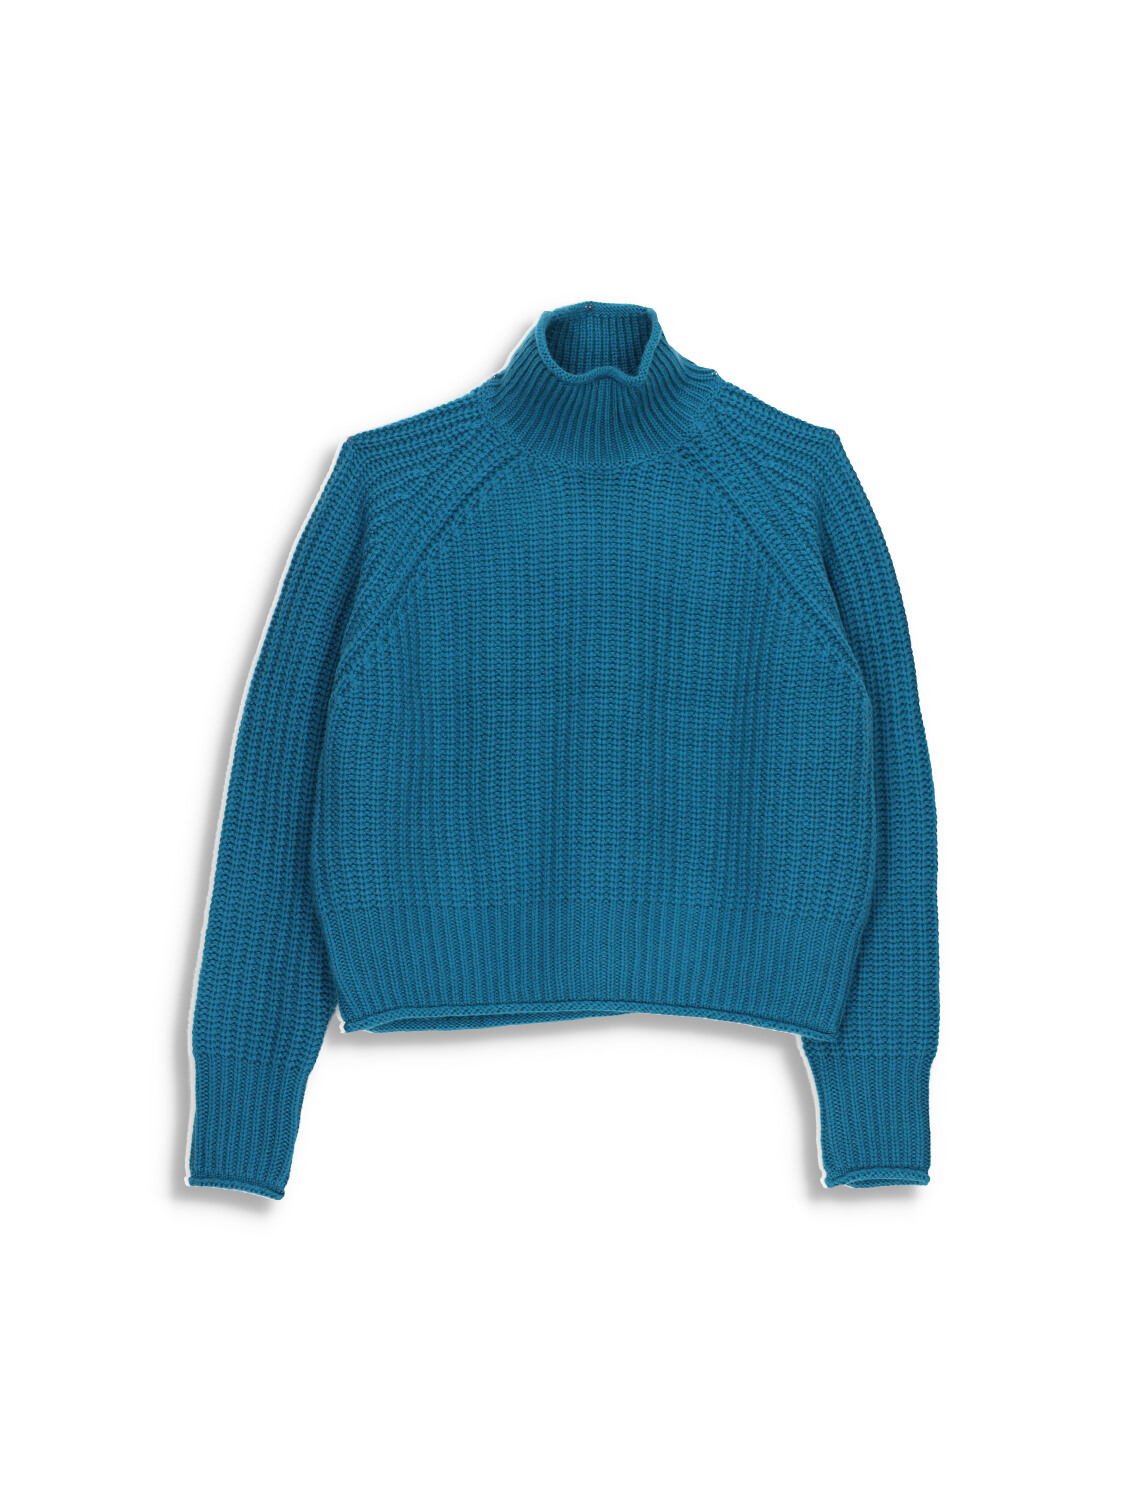 Wool knit sweater with stand up collar